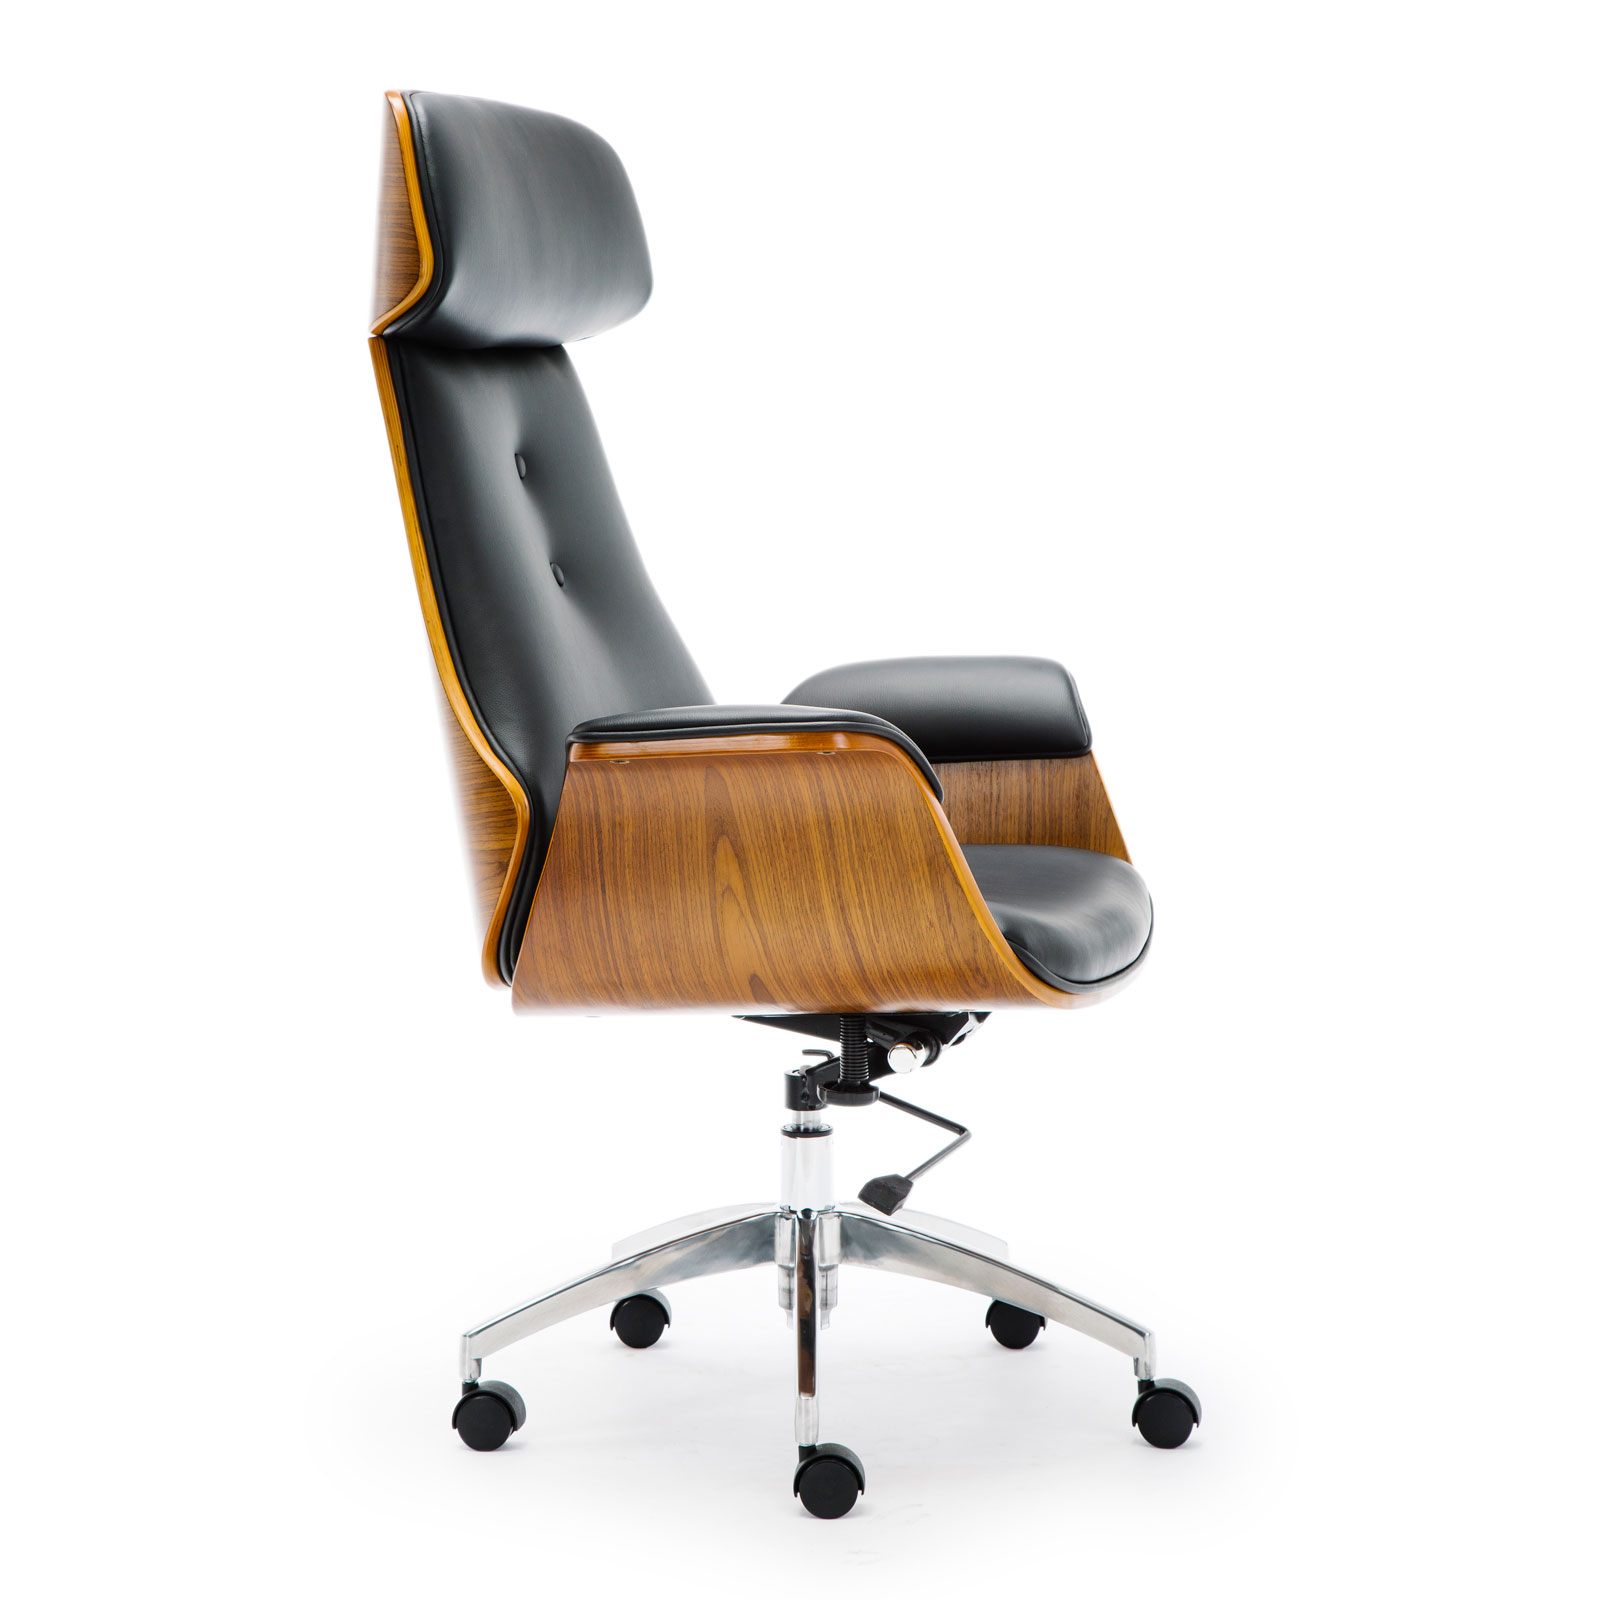 Wooden Pu Leather Office Chair, Wood Leather Desk Chair